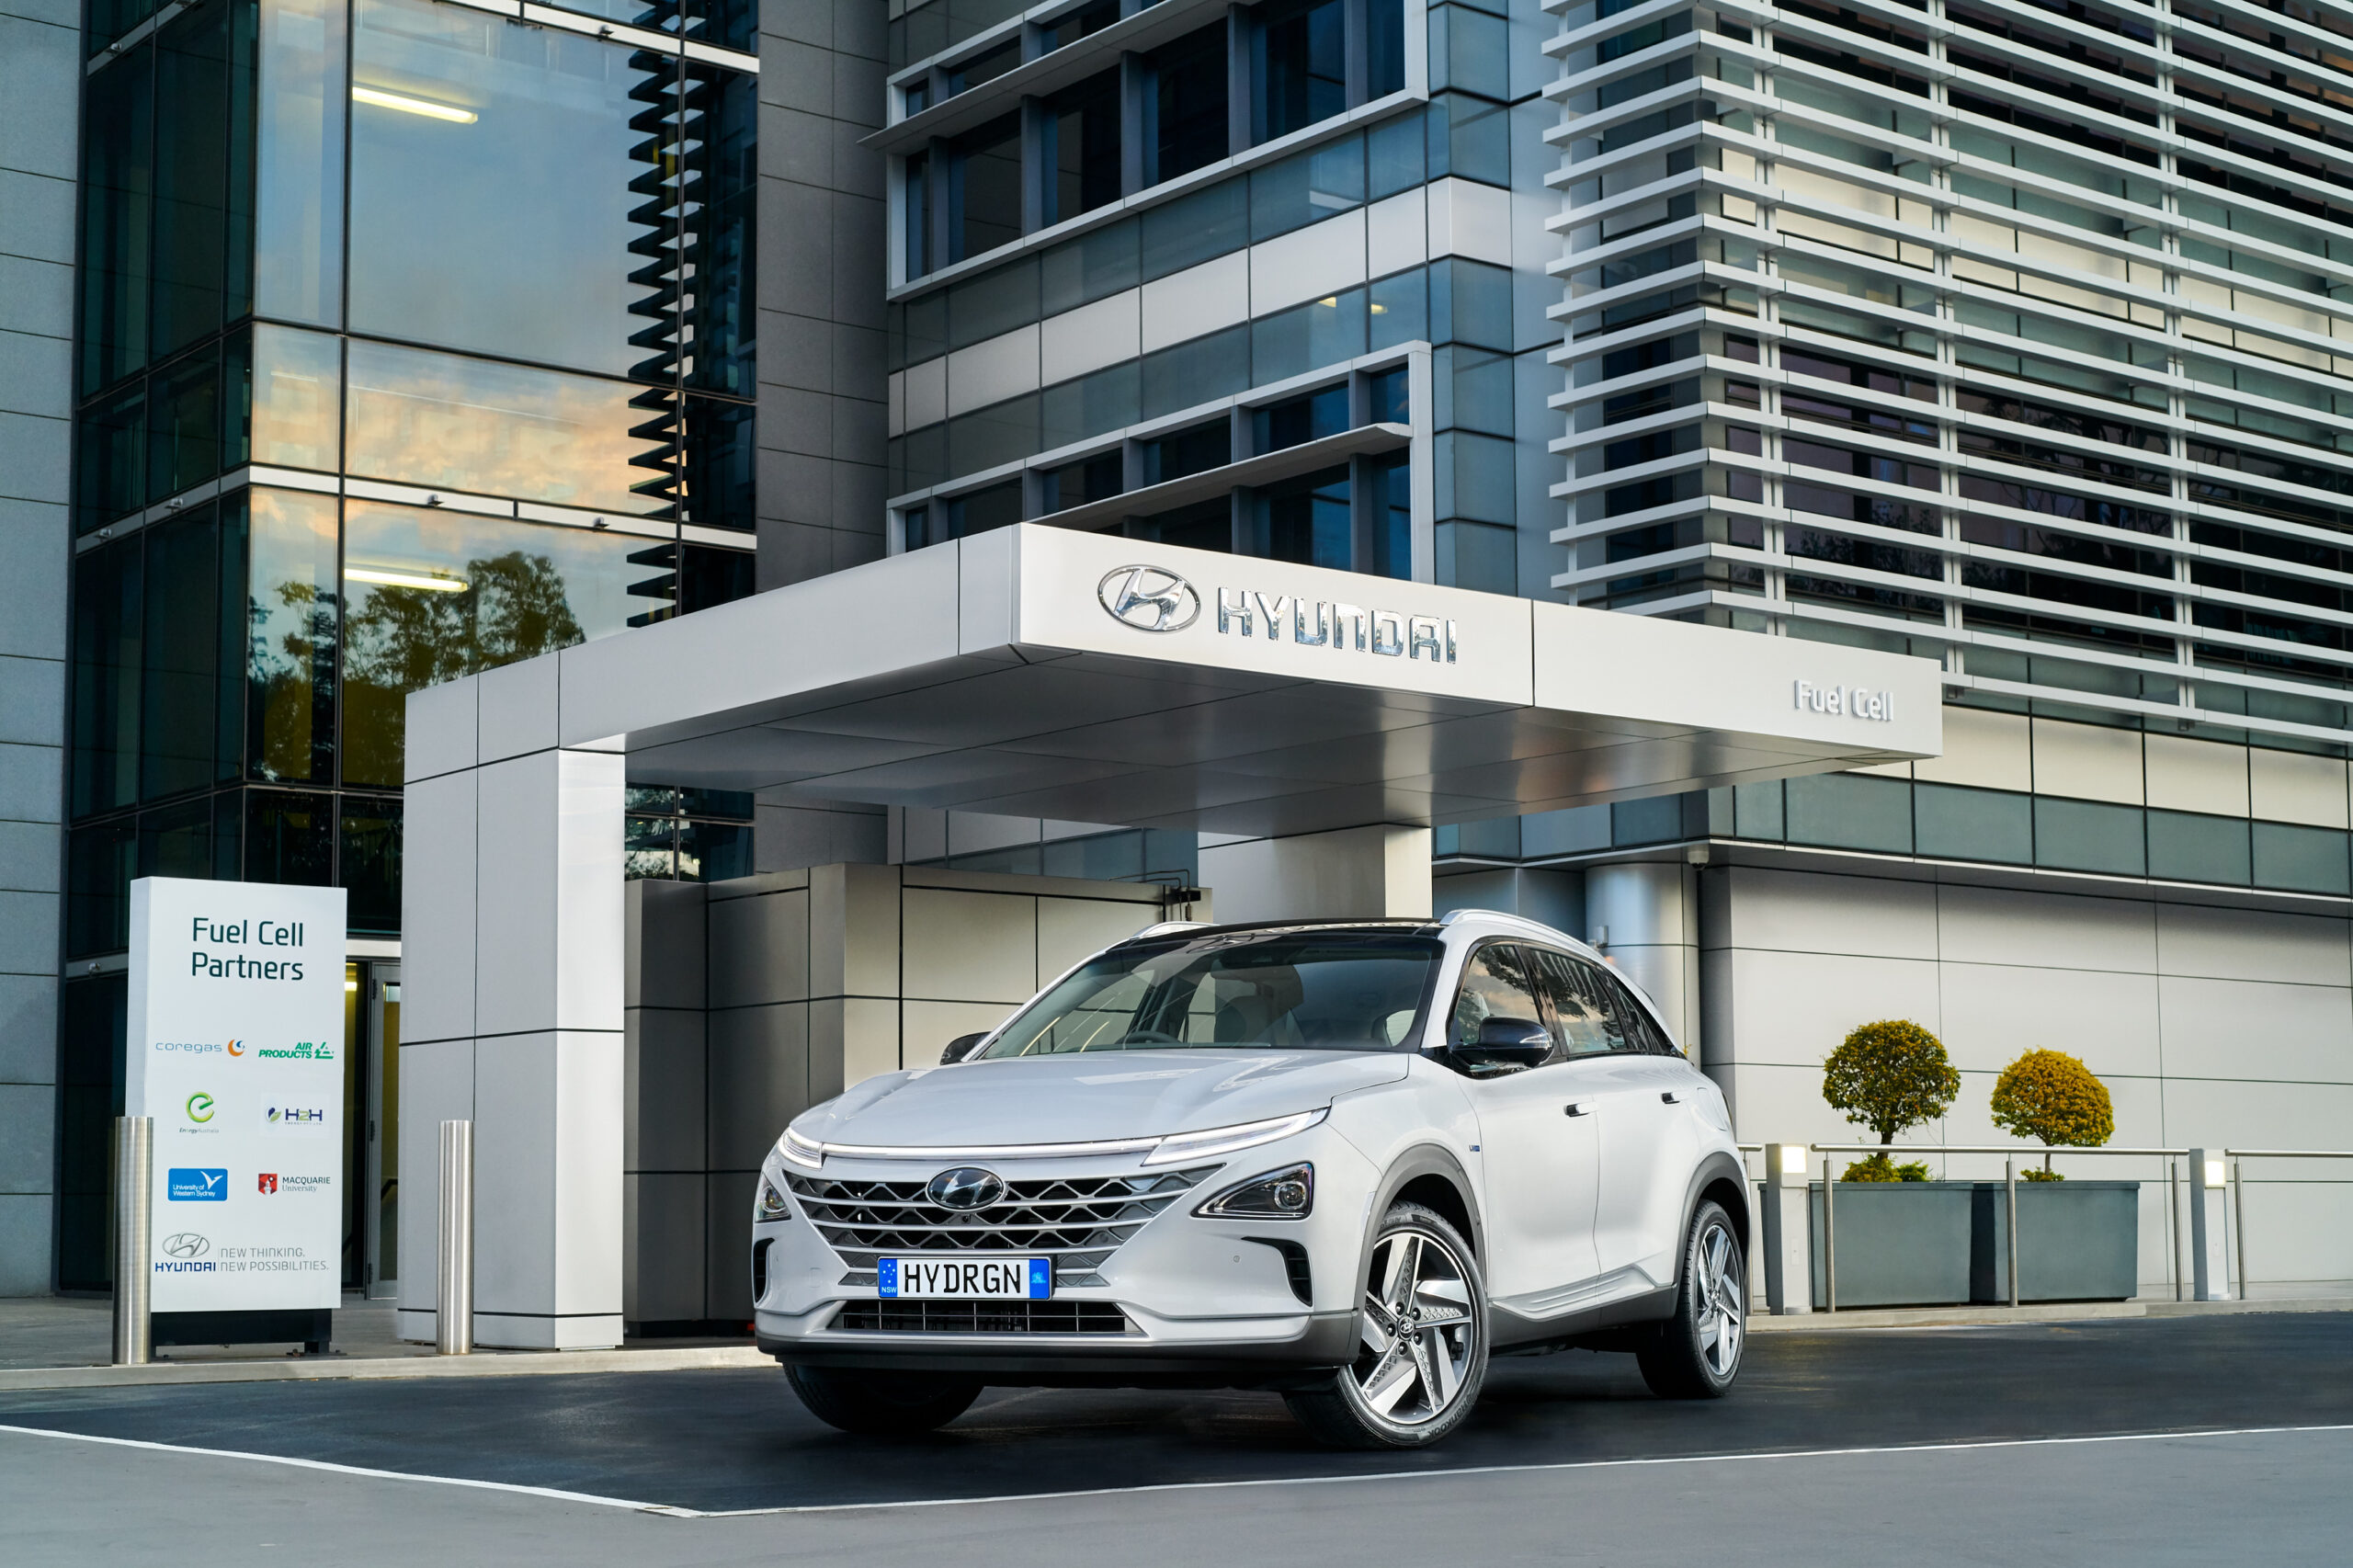 Hyundai supporting fleets to smoothly transition to cleaner transport solutions